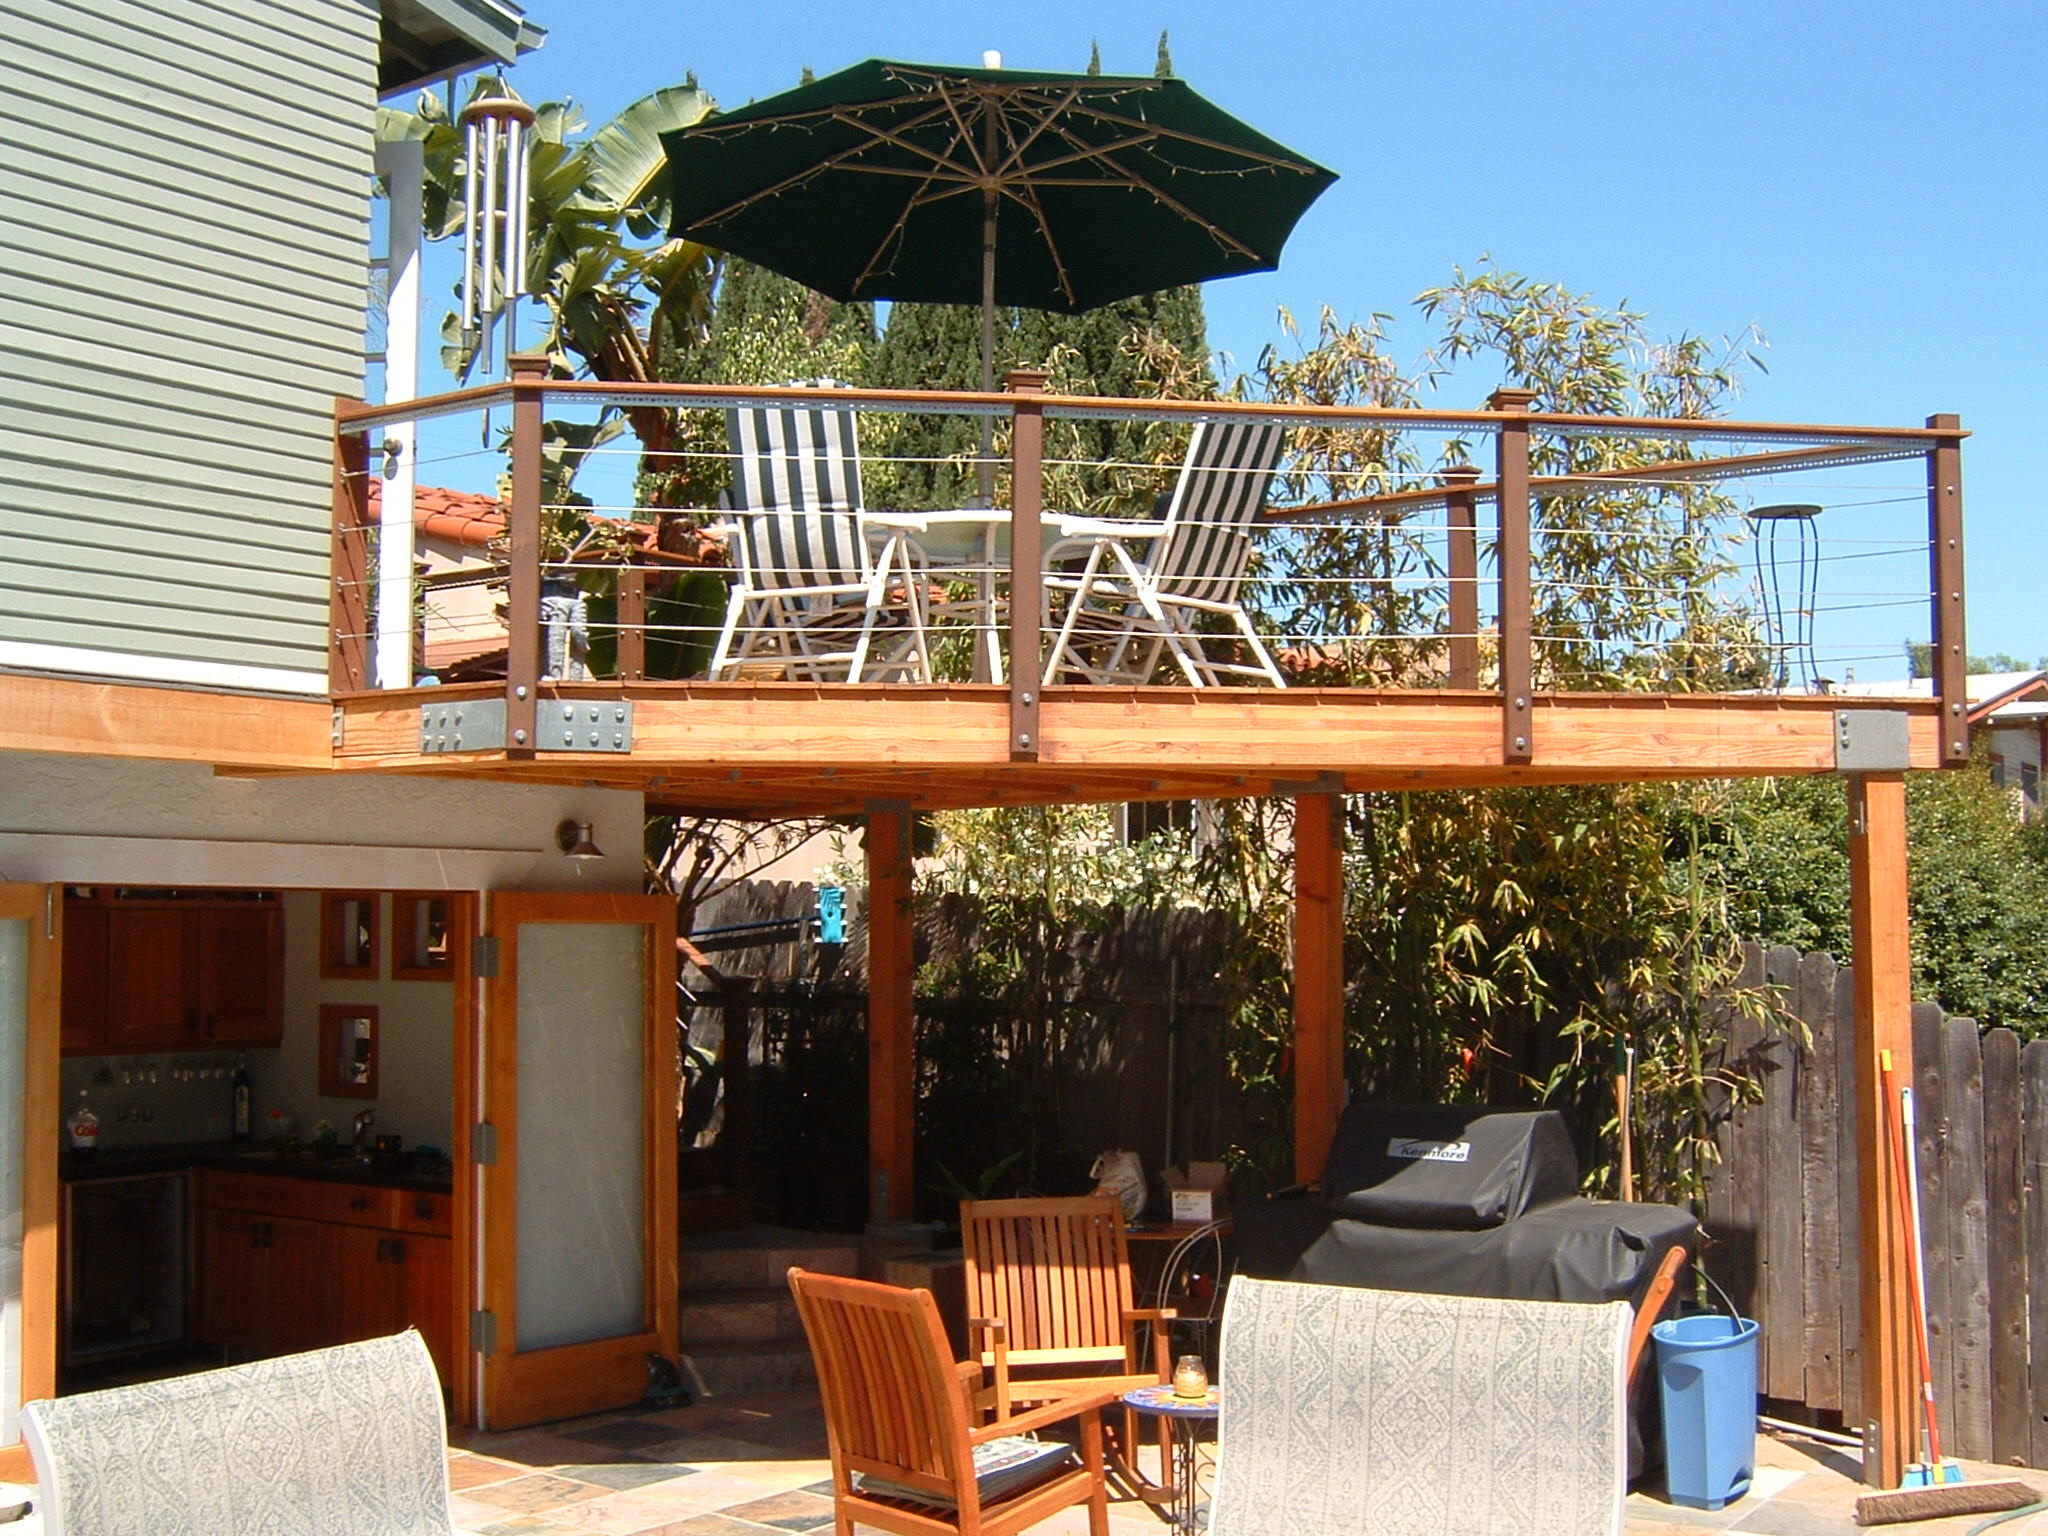  A beautiful angular deck with cable railings and an exterior stairway provide visual and physical access to the kitchen. 